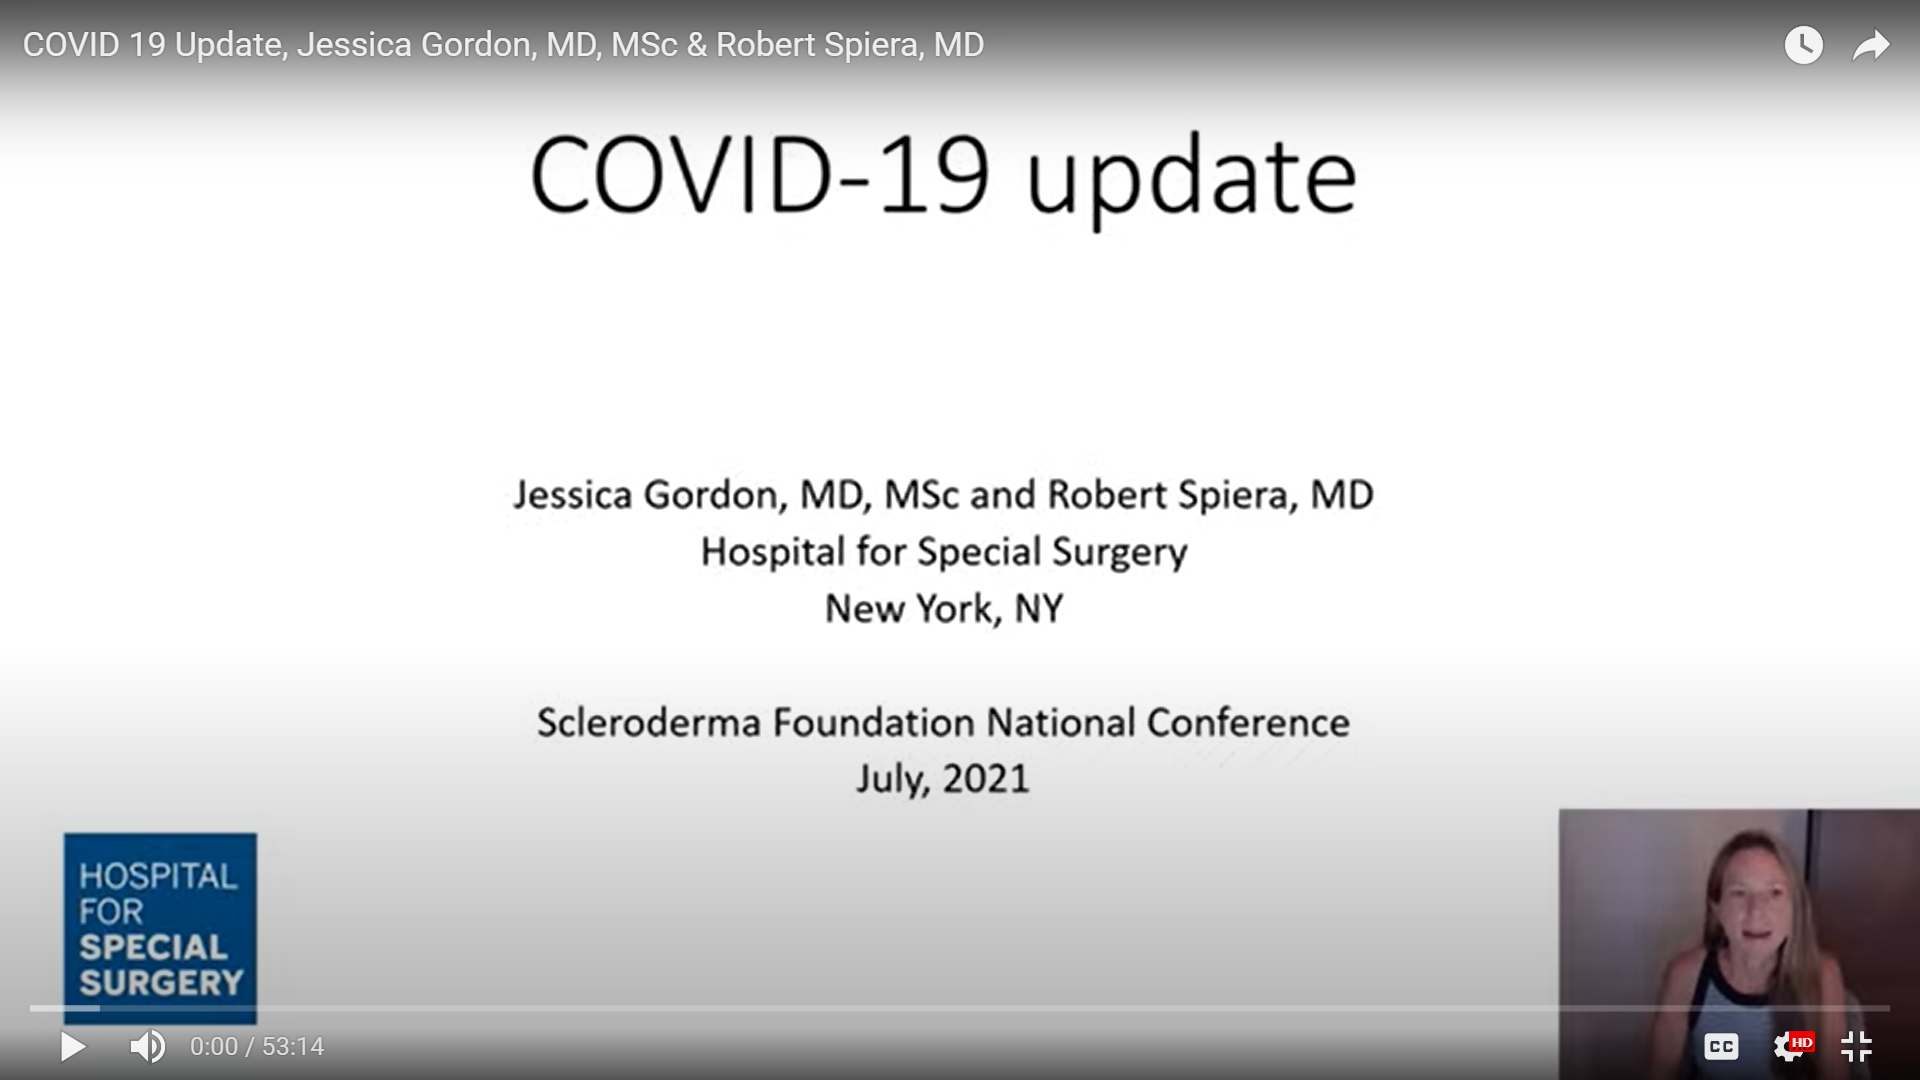 YouTube 2021 COIVD update Virtual Conference